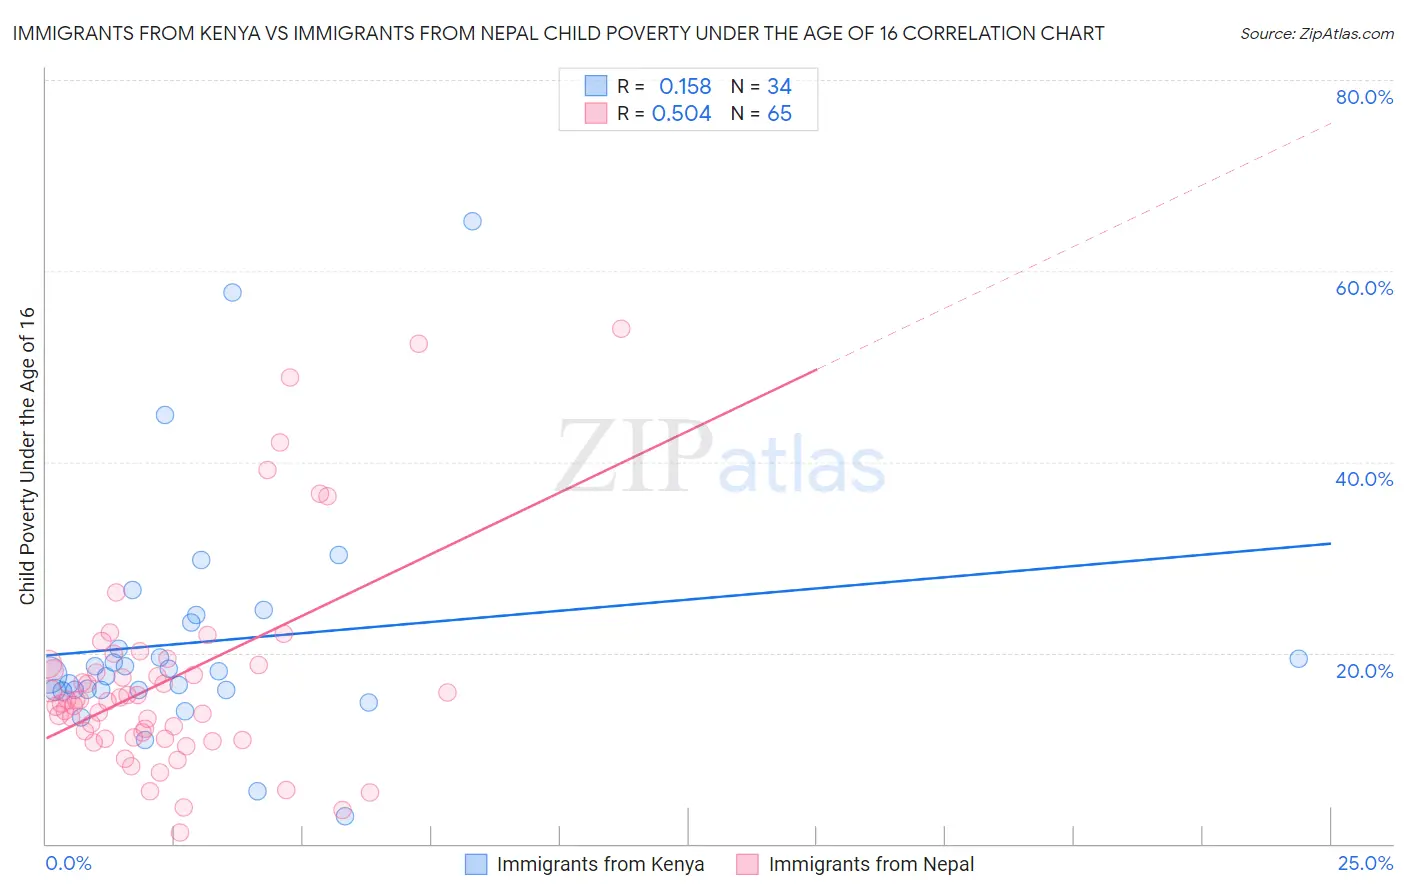 Immigrants from Kenya vs Immigrants from Nepal Child Poverty Under the Age of 16